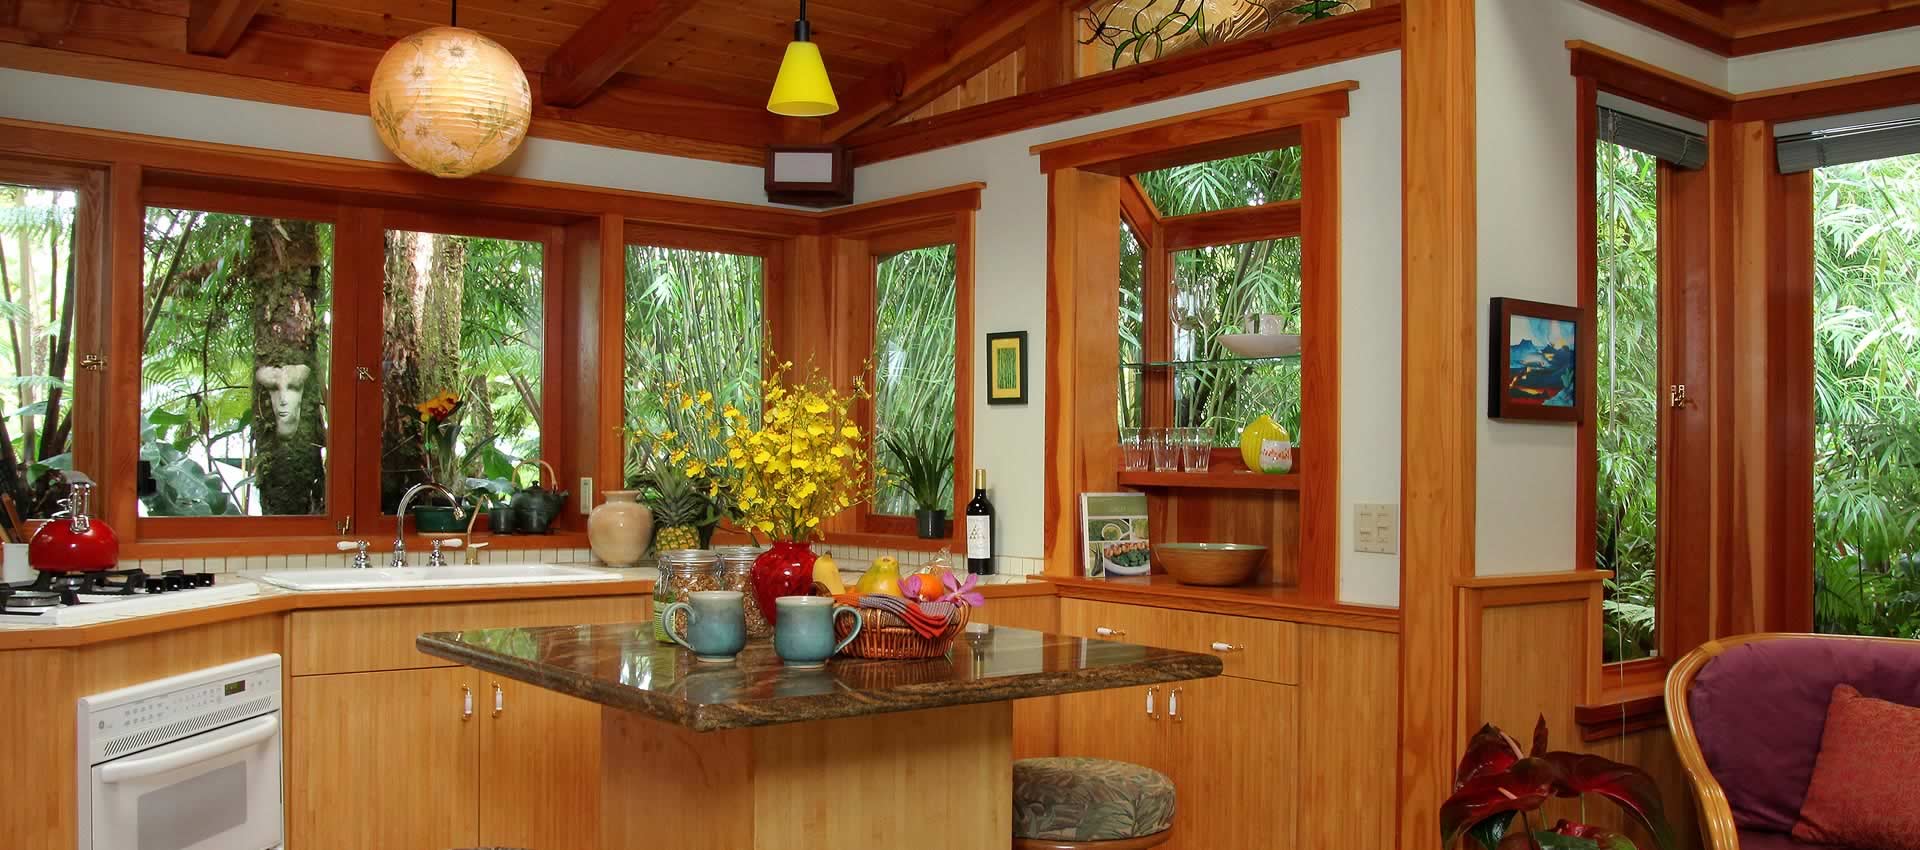 Bamboo Guest House kitchen with island dining area